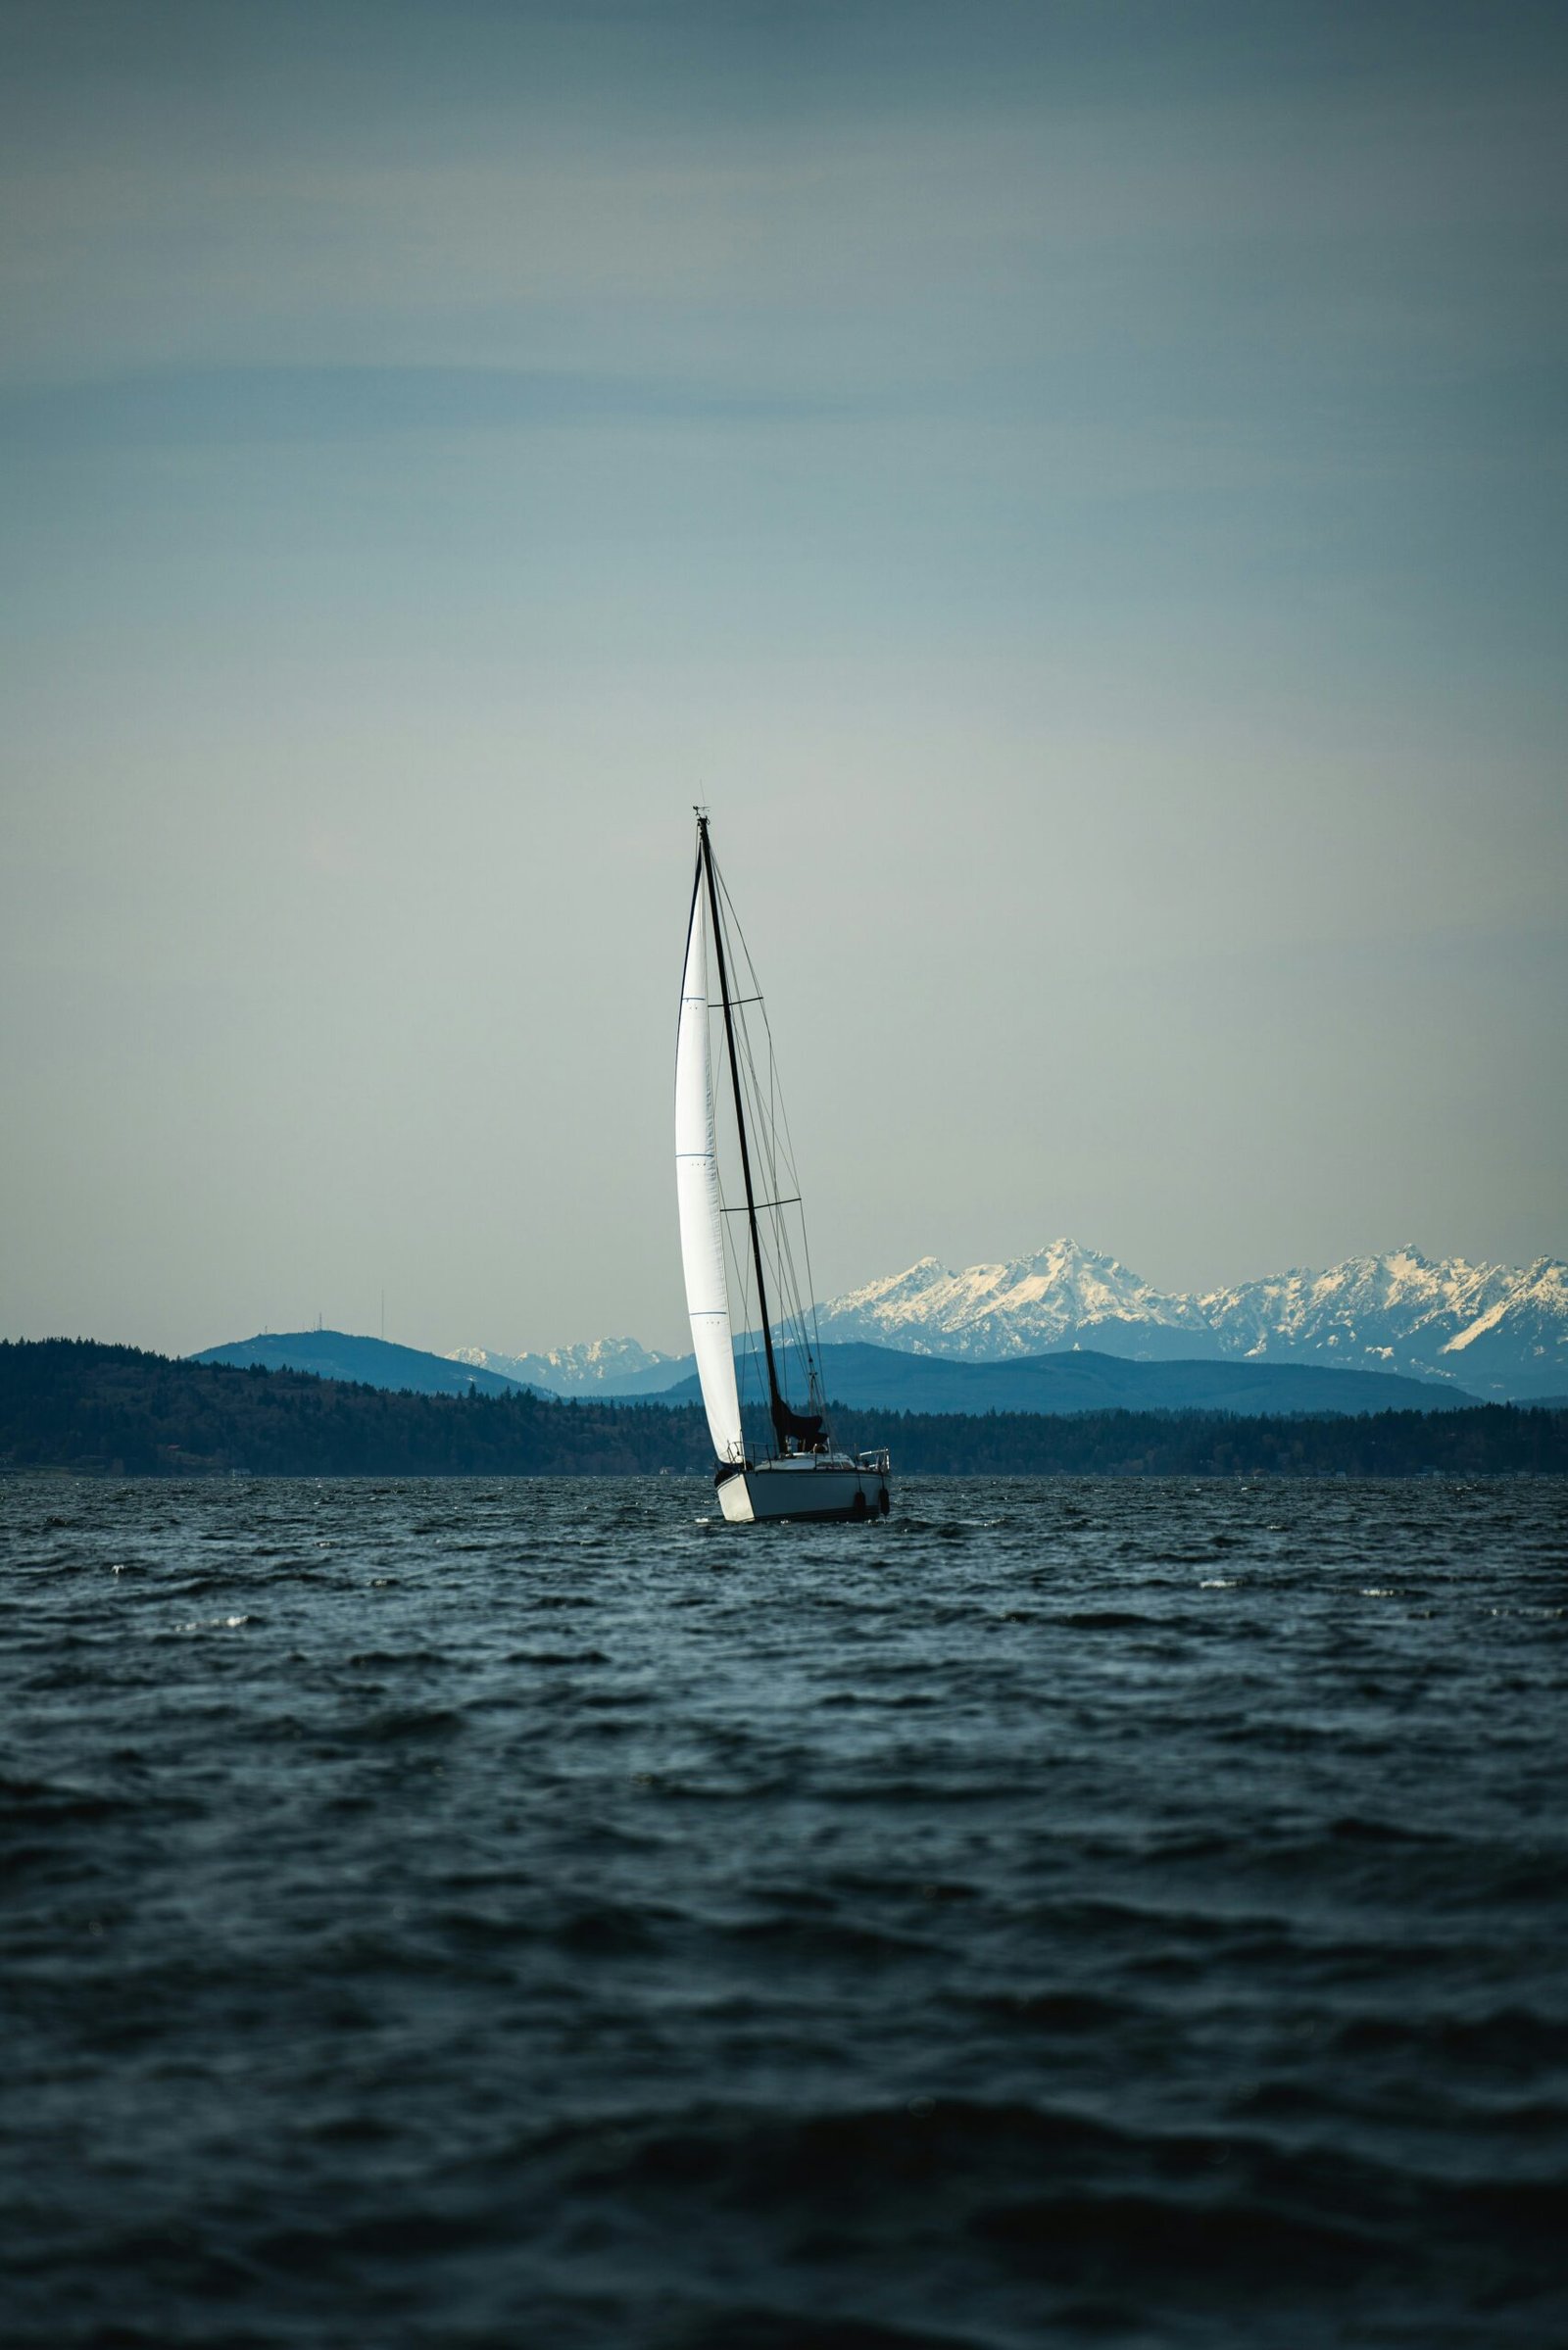 a sailboat in the ocean with mountains in the background